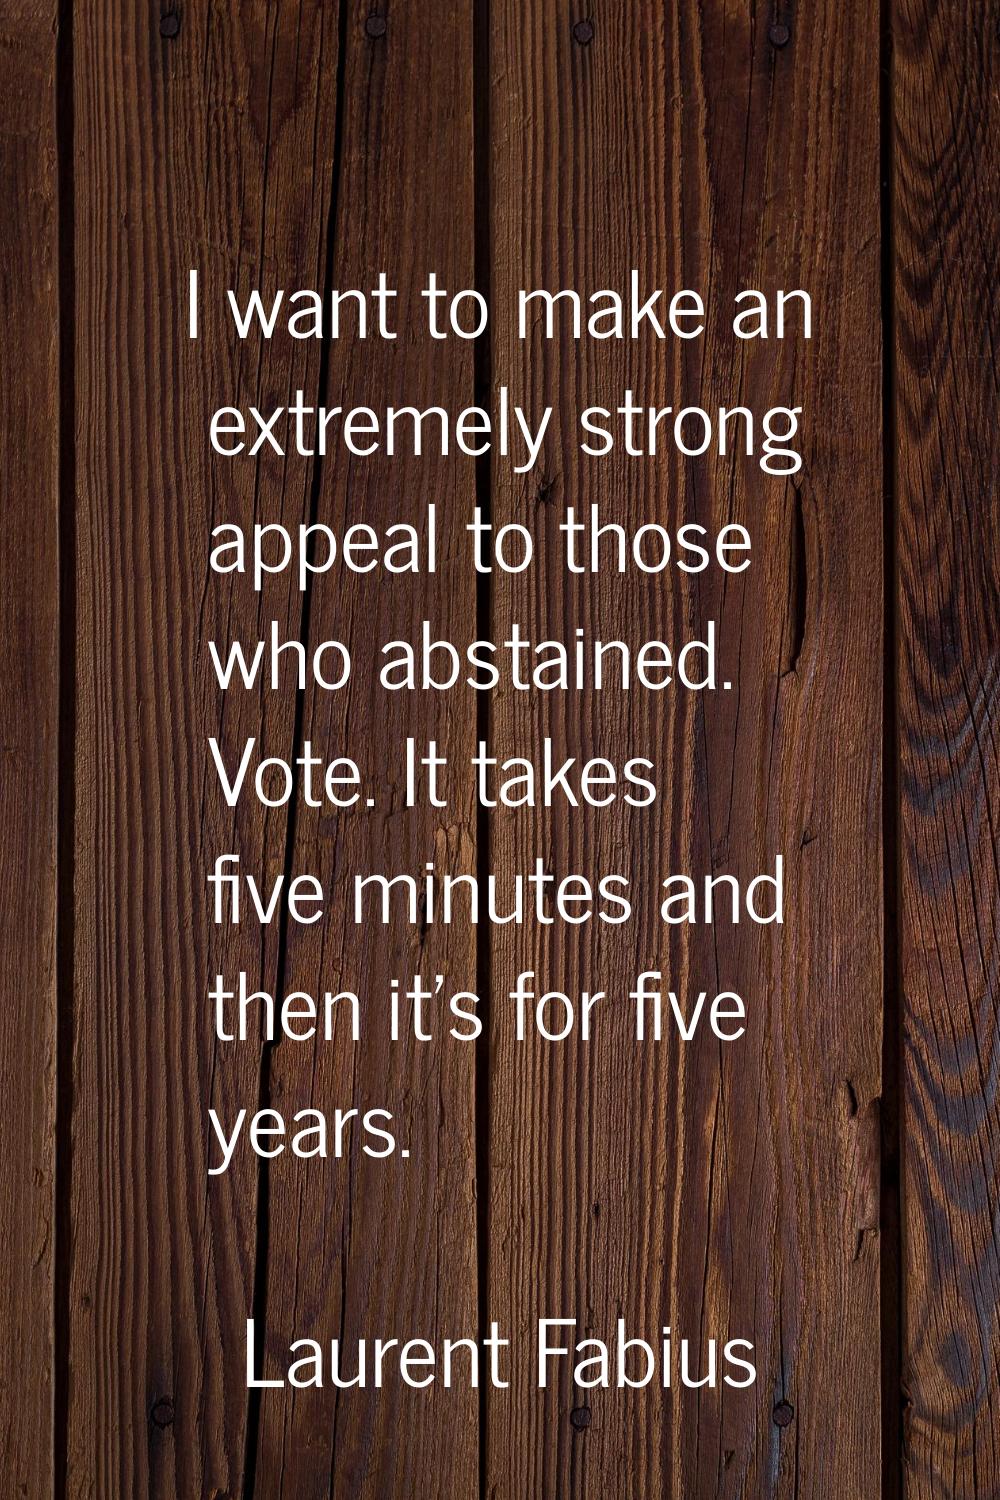 I want to make an extremely strong appeal to those who abstained. Vote. It takes five minutes and t